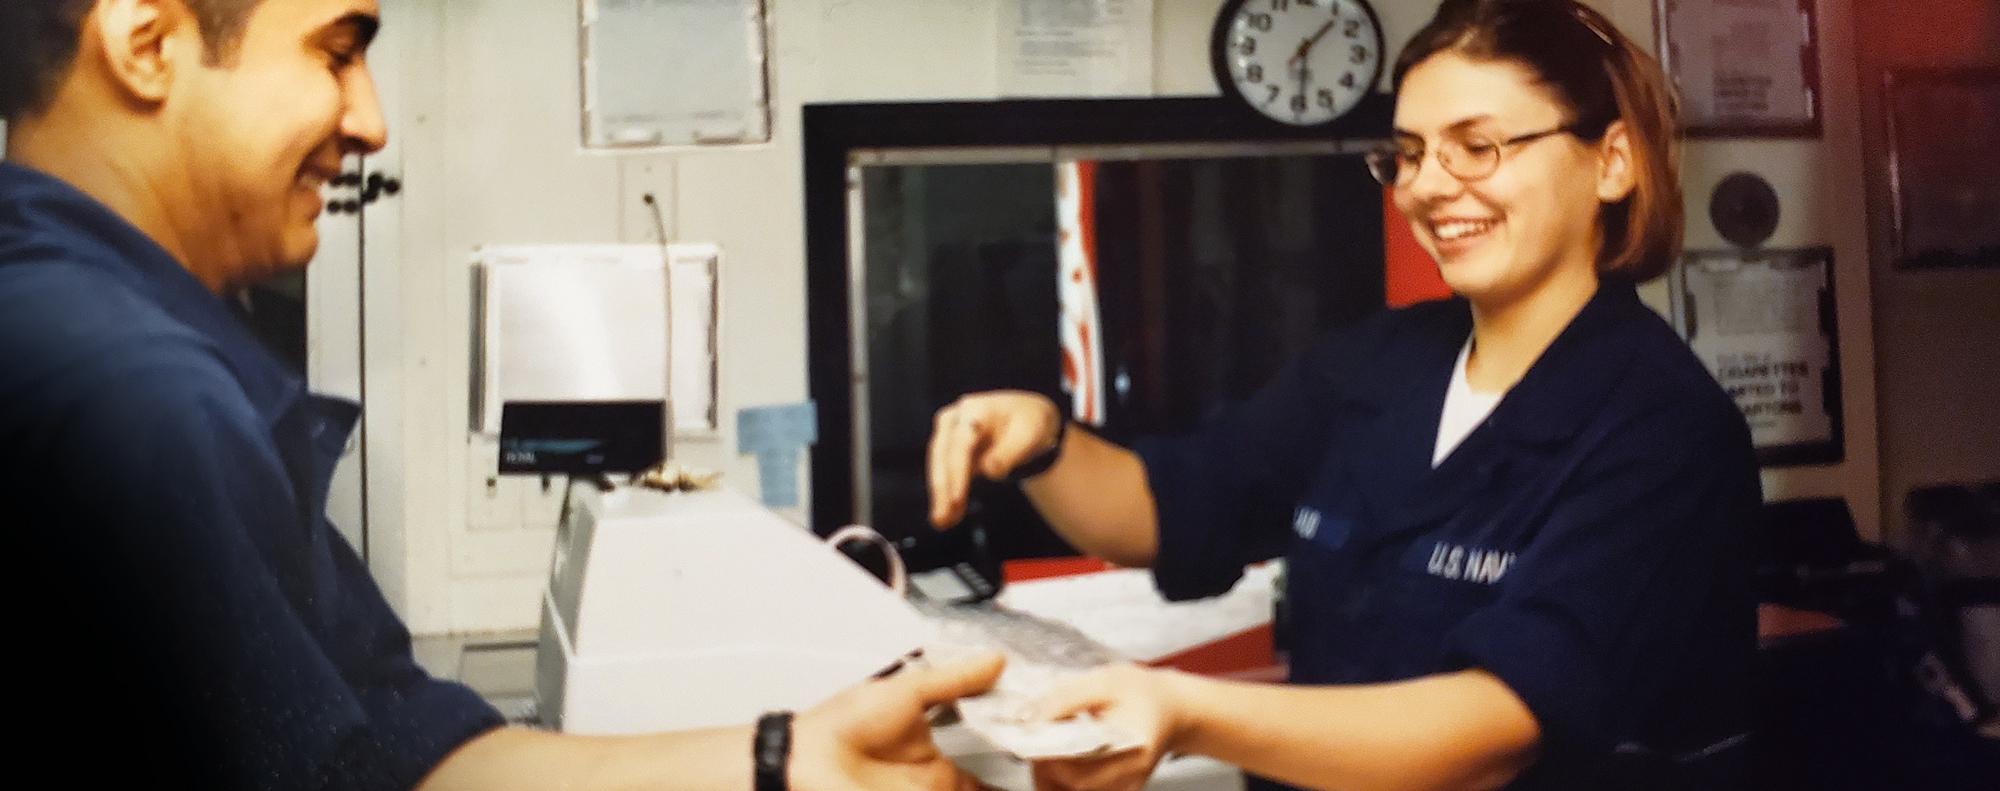 Melissa as a young Navy officer handing change to a shipmate in the on-board store